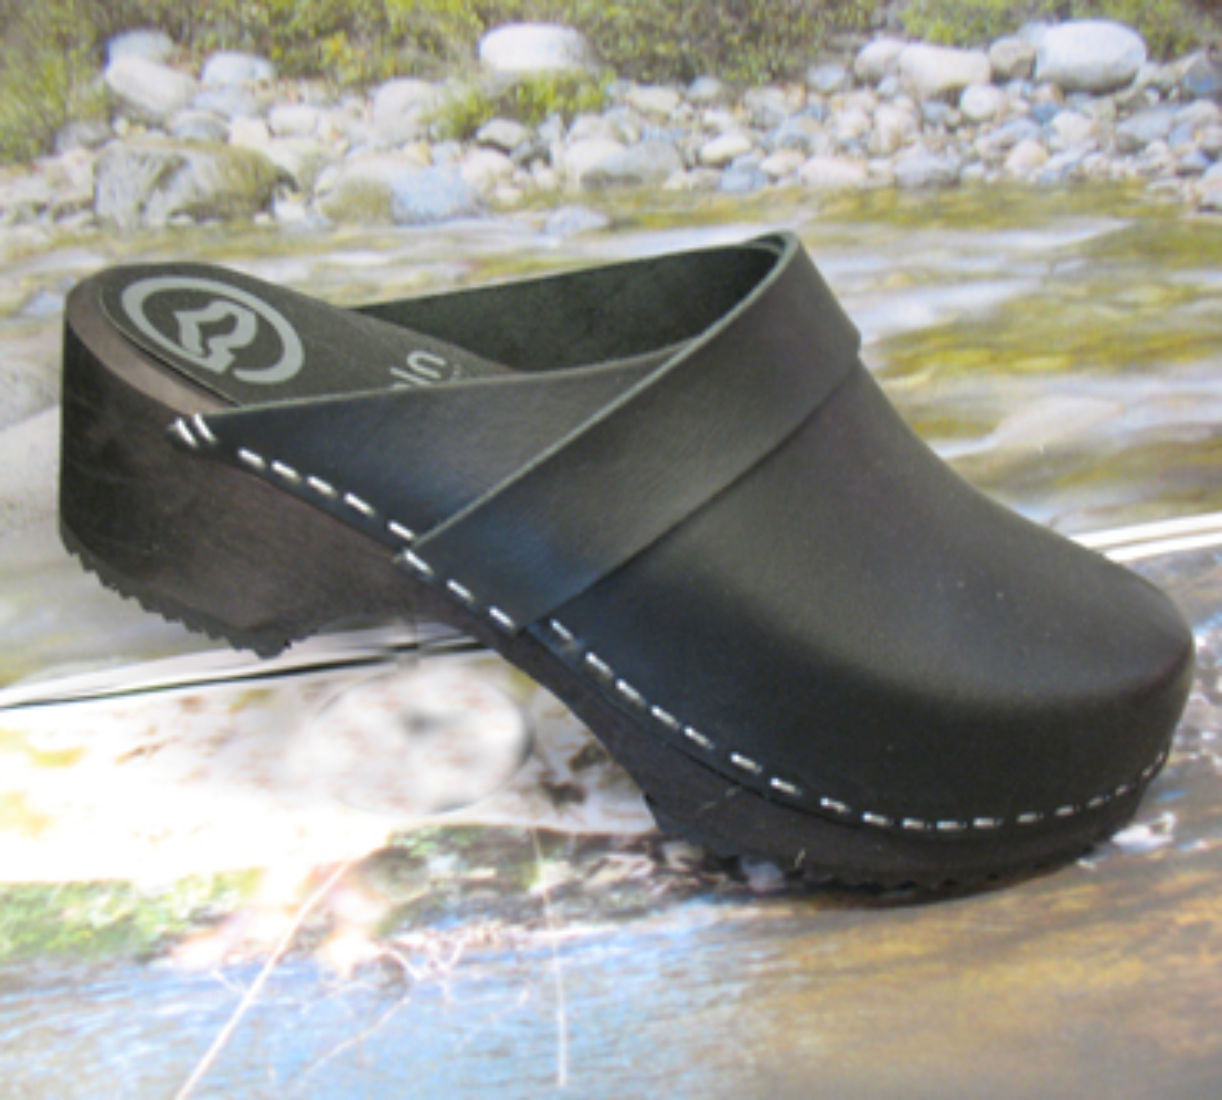 toffeln clogs